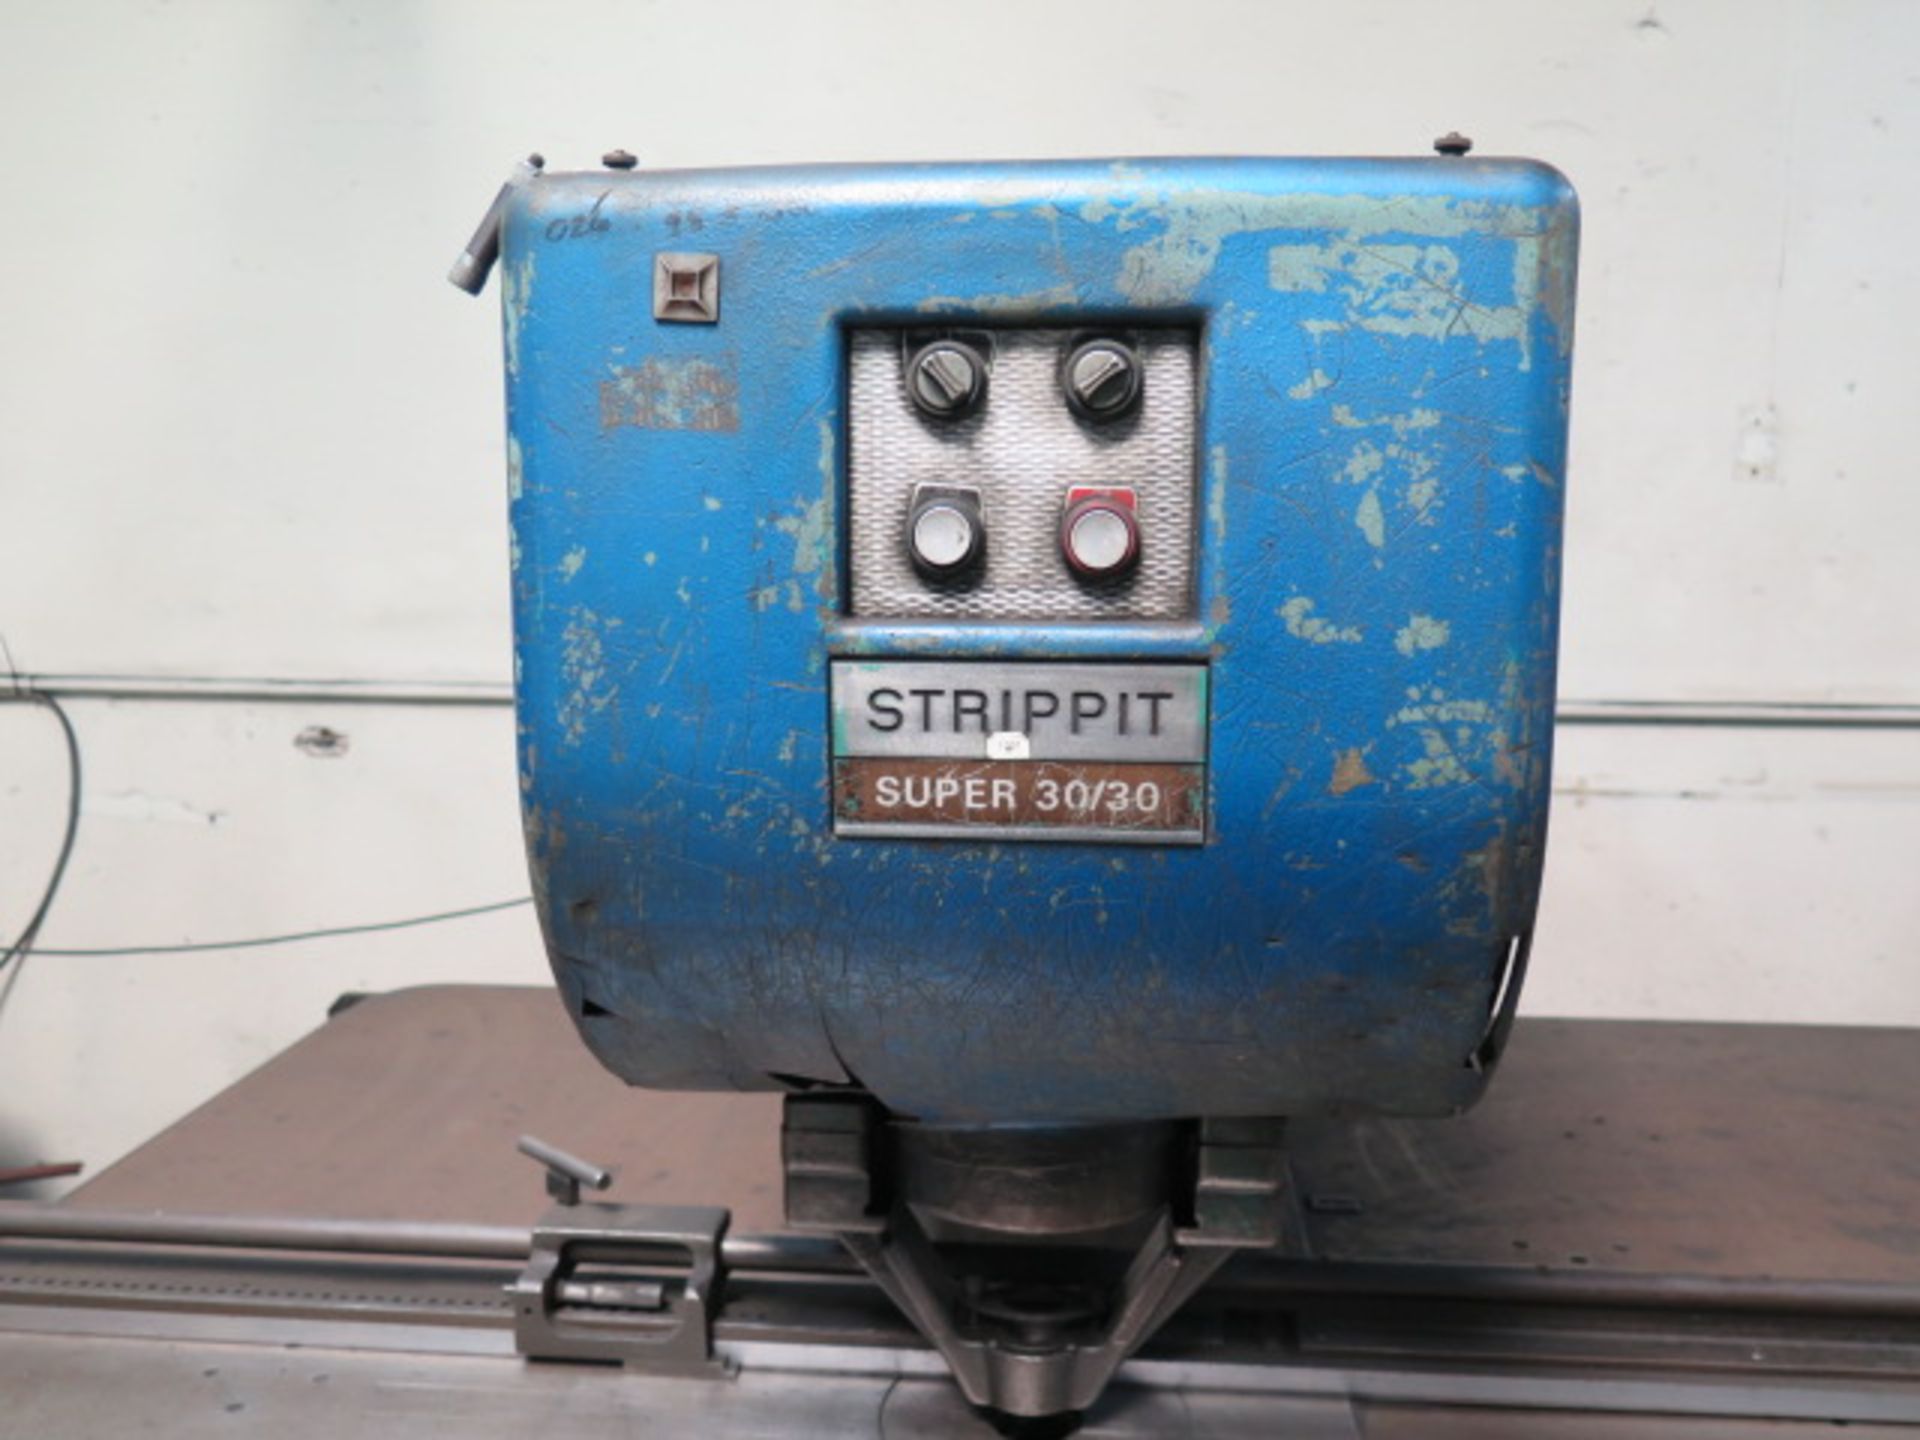 Strippit Super 30/30 Sheet Metal Fabrication Punch Press w/ Fence System (SOLD AS-IS - NO WARRANTY) - Image 5 of 18